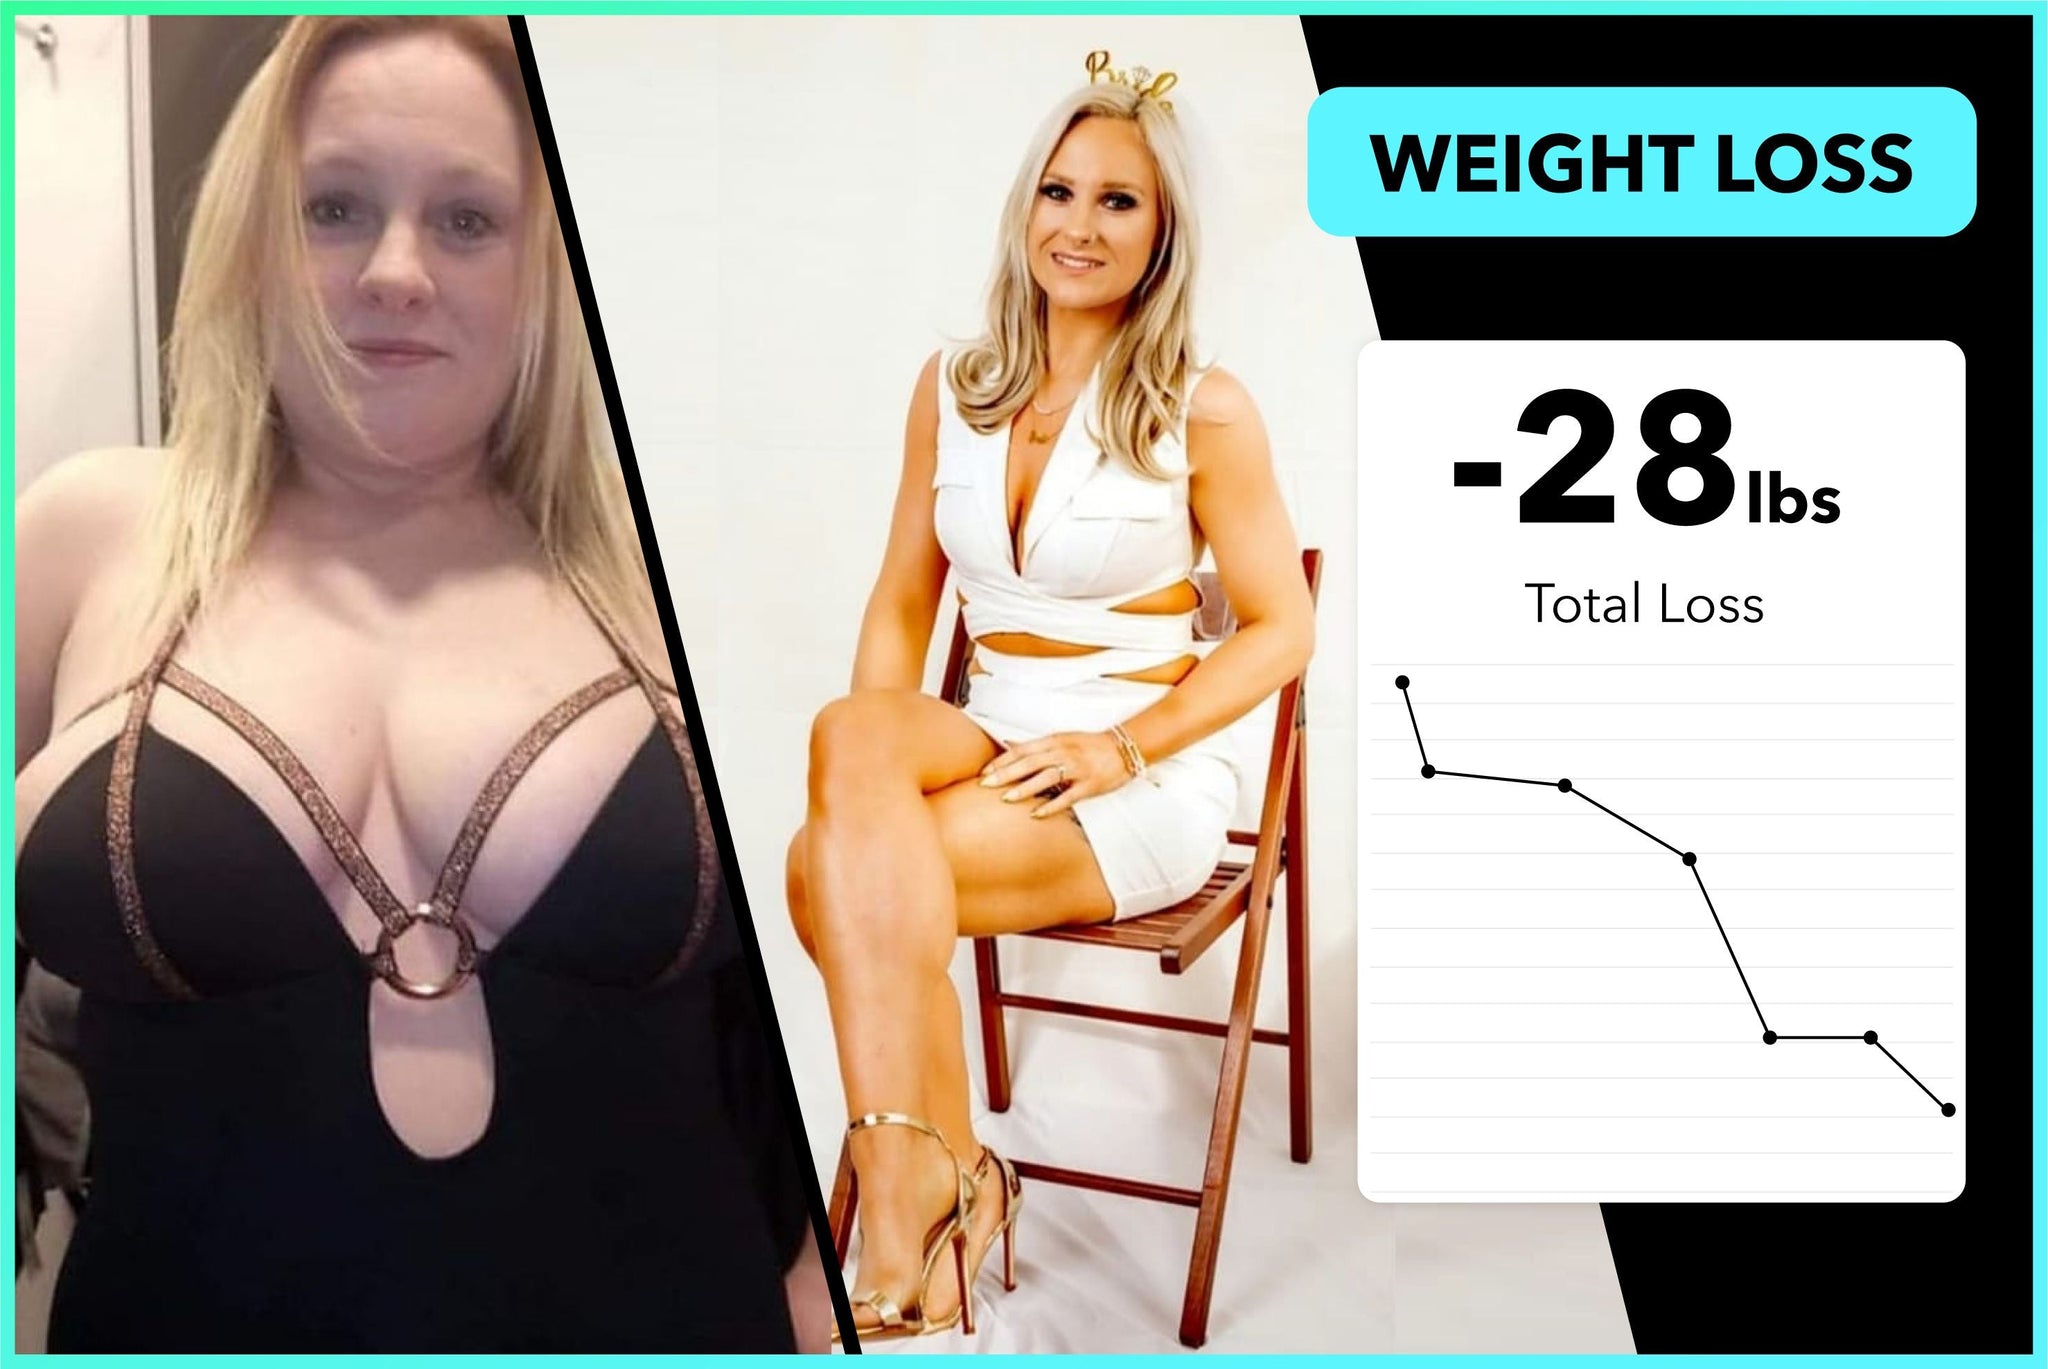 Louise has dropped 28lbs with Team RH